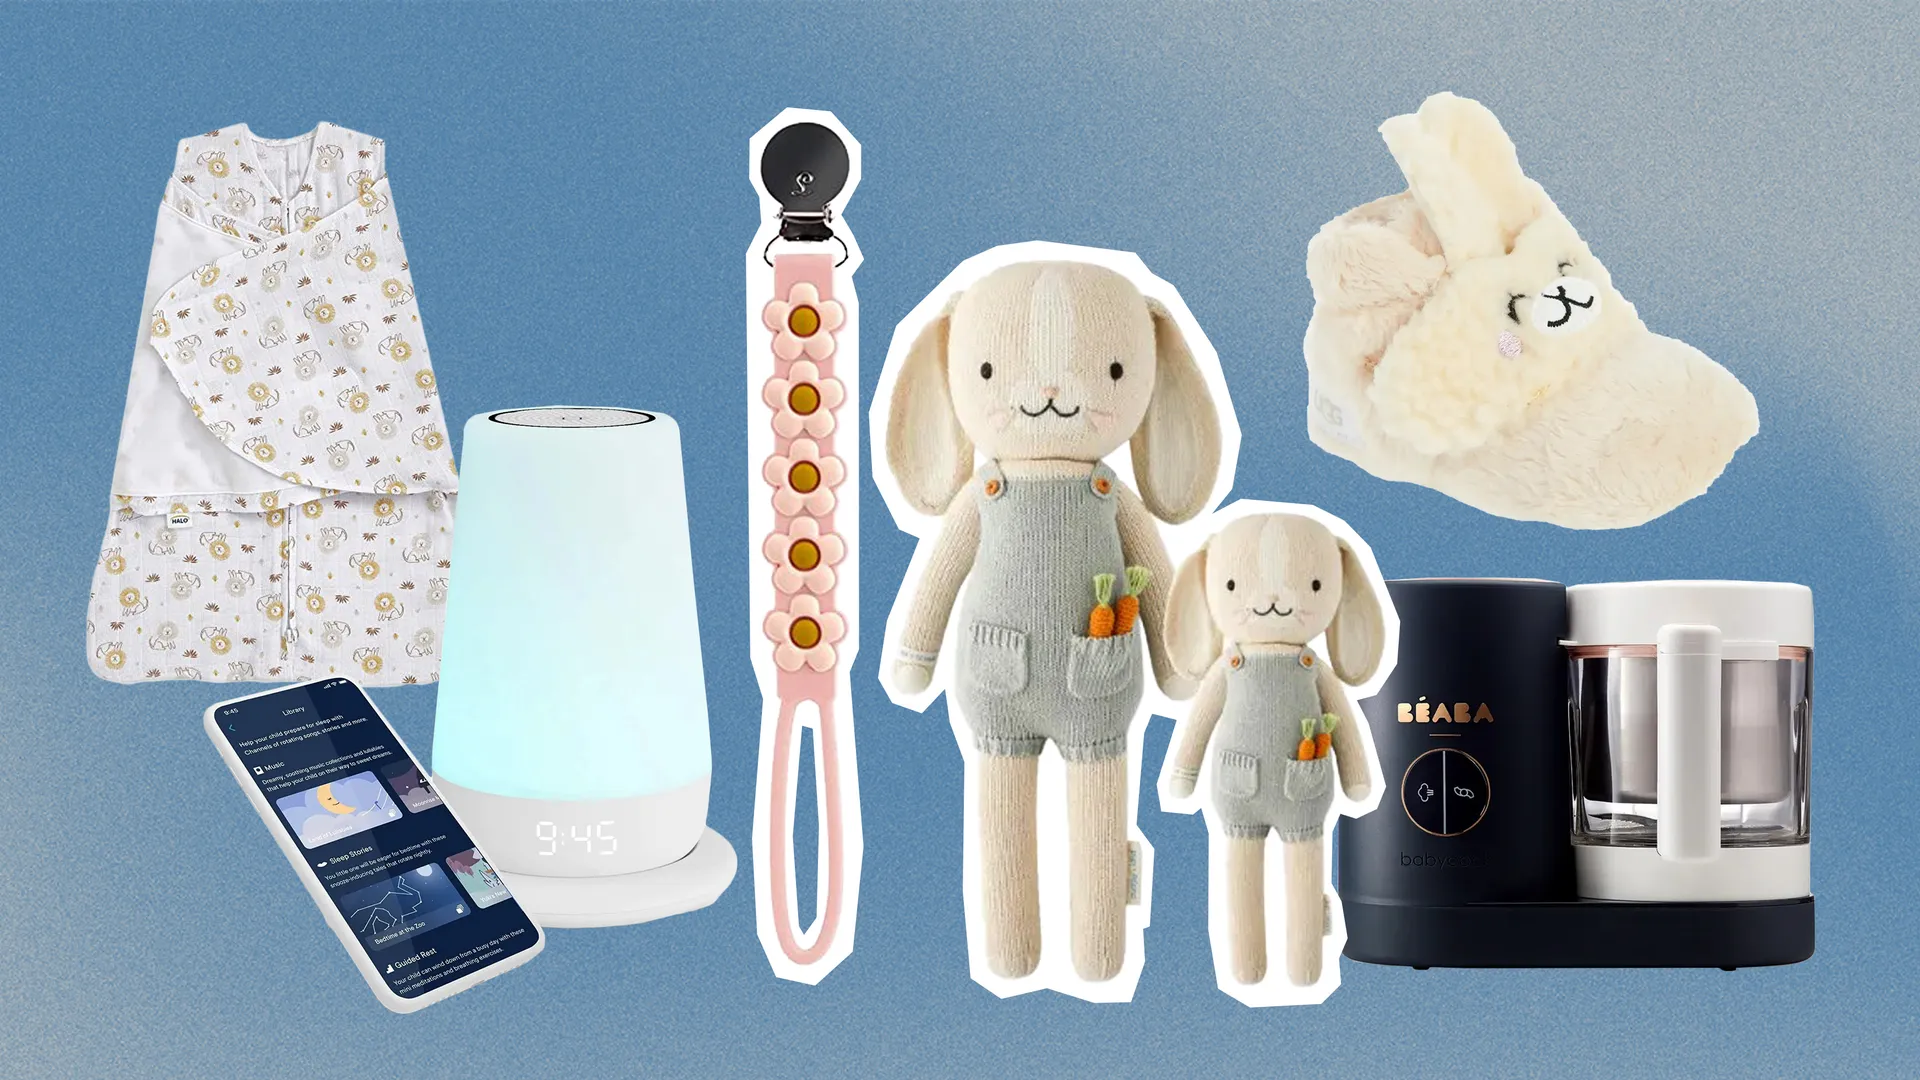 55 Best Baby Gifts Chosen by New Parents: Foolproof Presents for the Newest Arrival